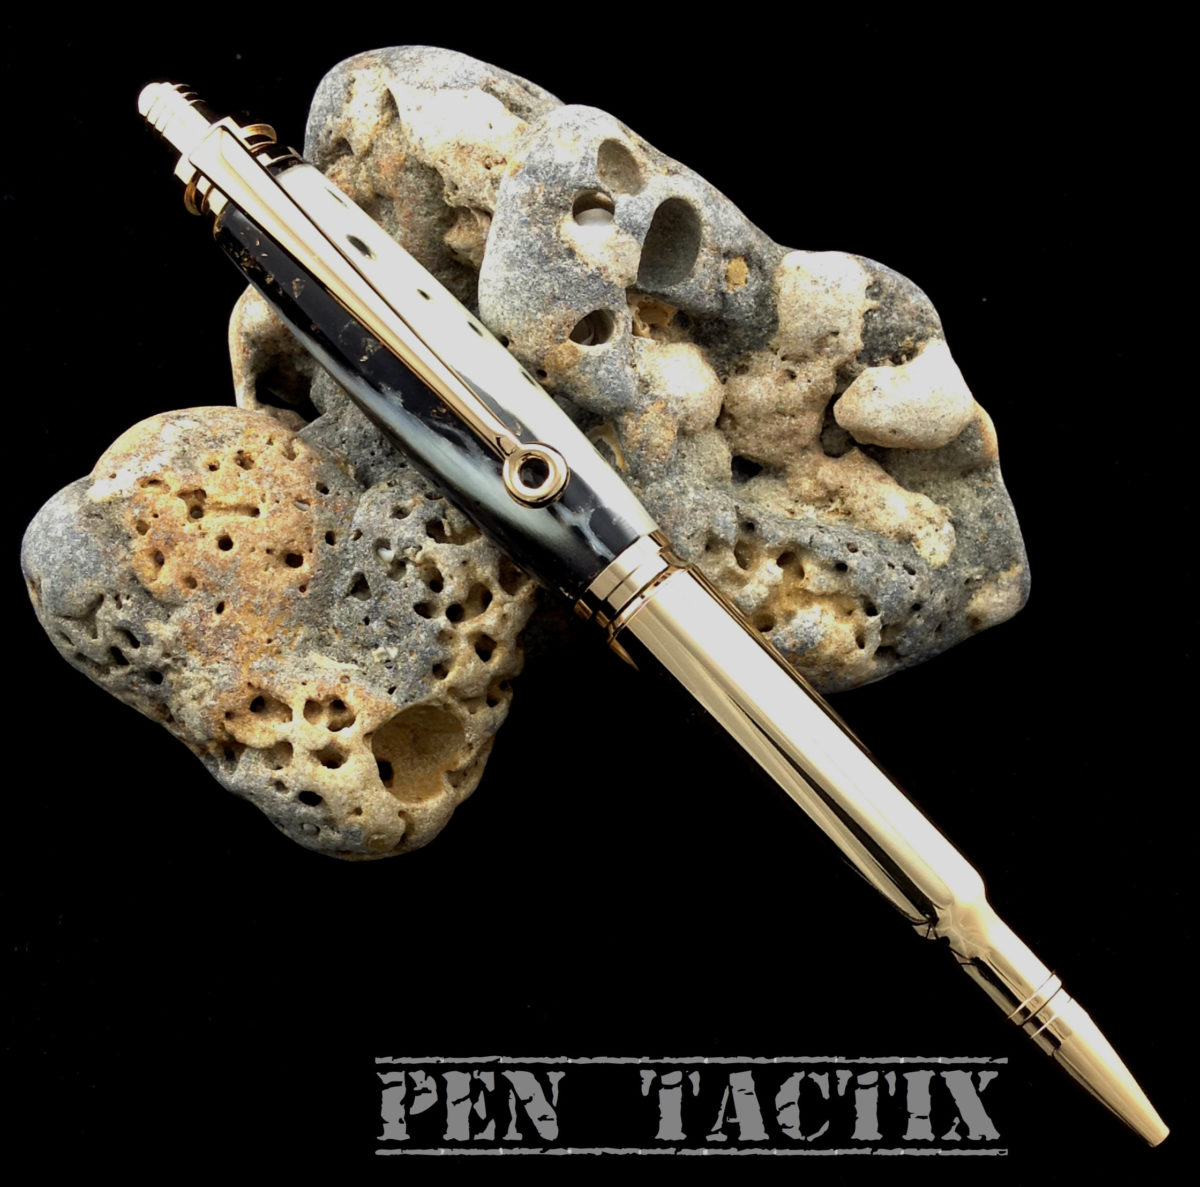 Alligator Jaw Pens ON SALE!  Enter Code: GATORMENOW for a 10% savings!!! (This week only)